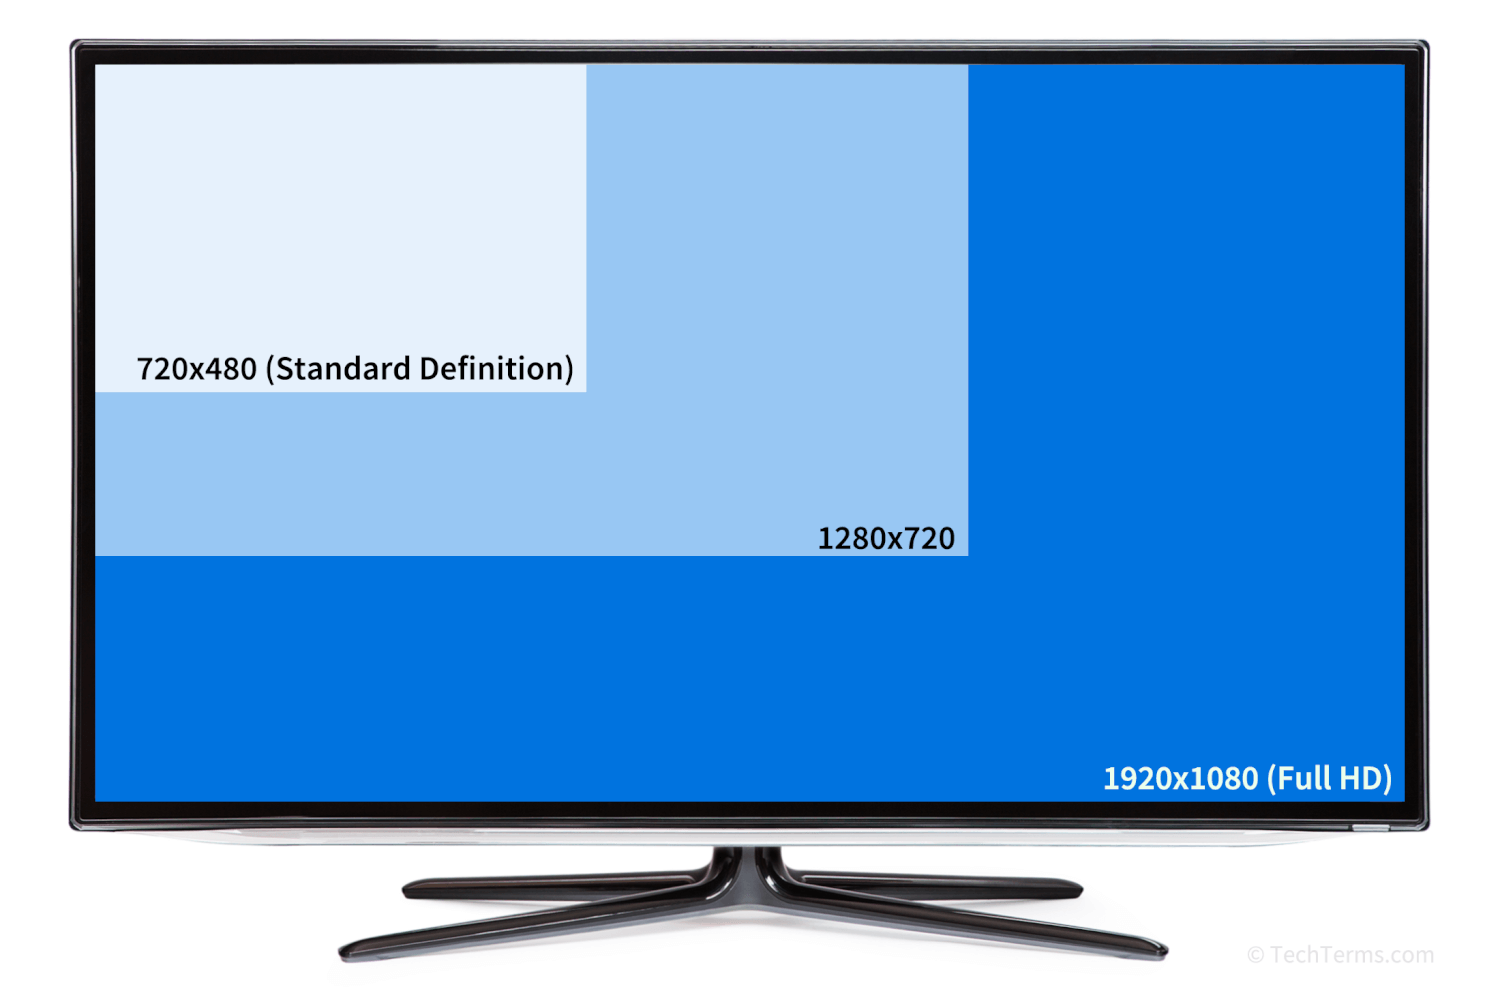 The relative resolution of an SDTV image compared to HDTV resolutions